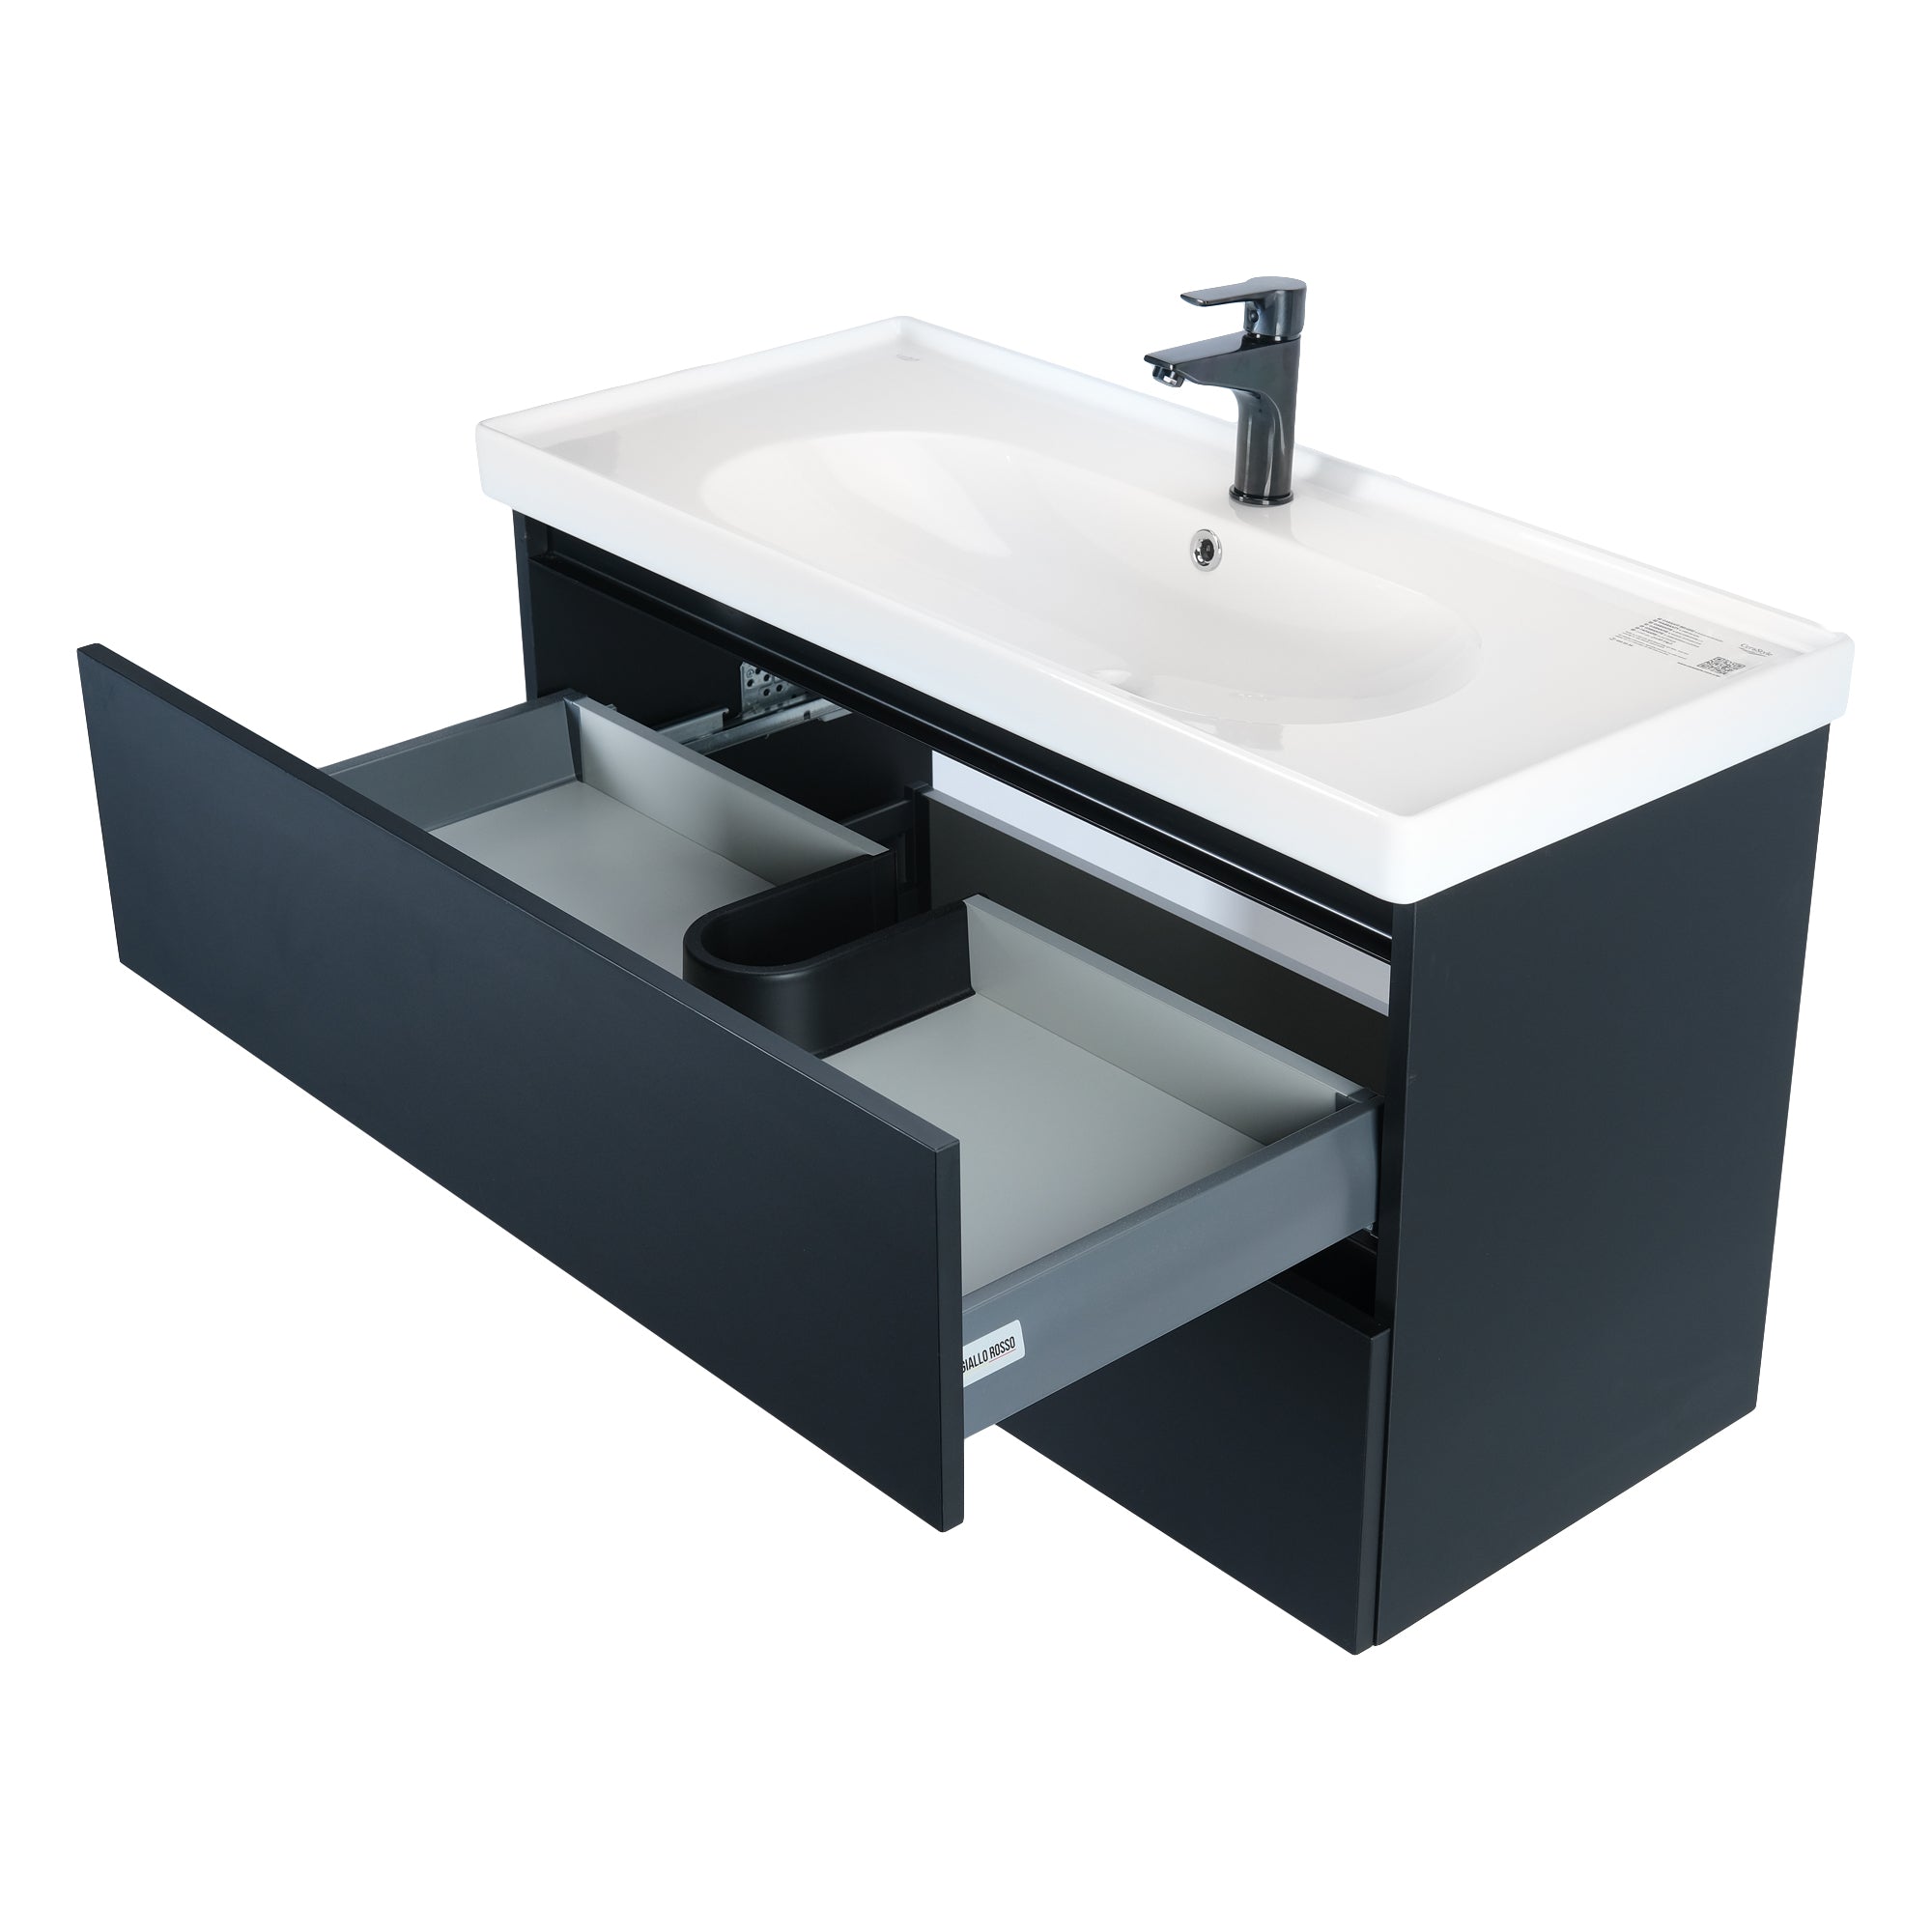 BRASIL 40 INCH MODERN WALL MOUNT VANITY AND SINK COMBO - CHARCOAL GRAY